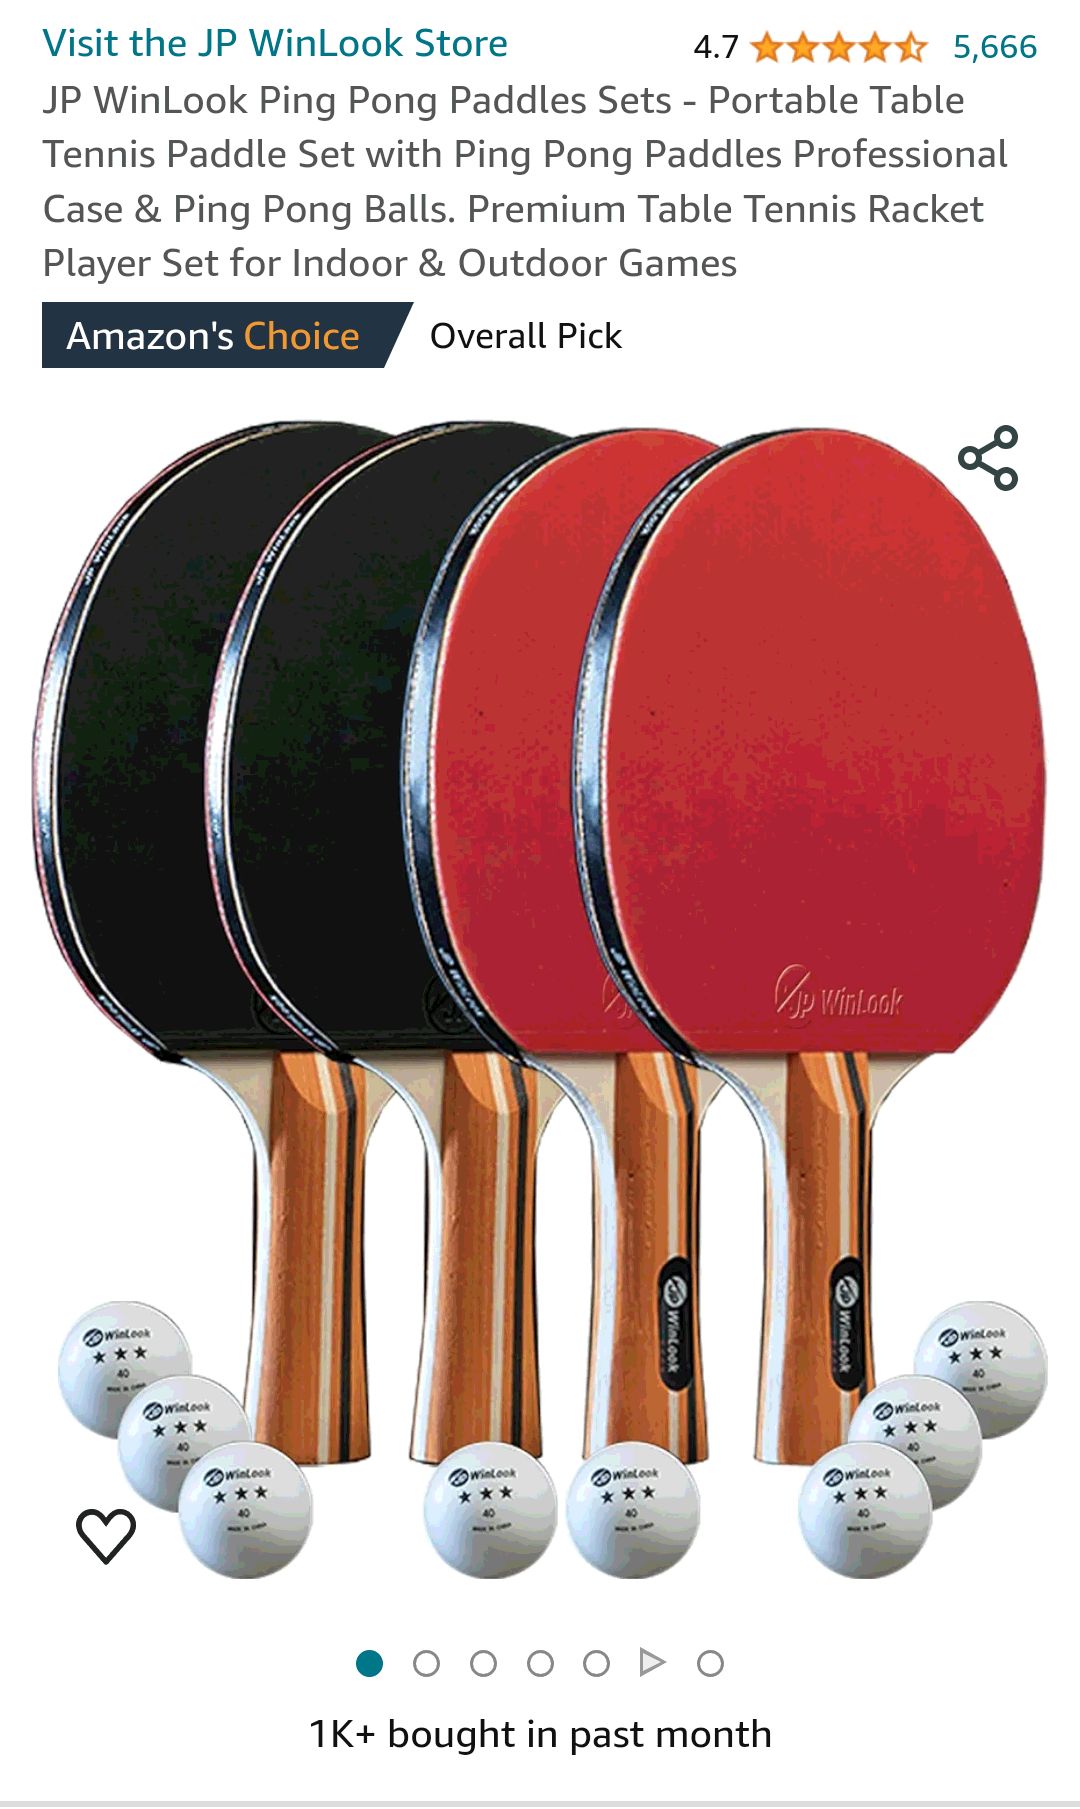 Amazon.com : JP WinLook Ping Pong Paddles Sets of 4 - Portable Table Tennis Paddle Set with Ping Pong Paddles Professional Case & Ping Pong Balls. Premium Table Tennis Racket Player Set for Indoor & O